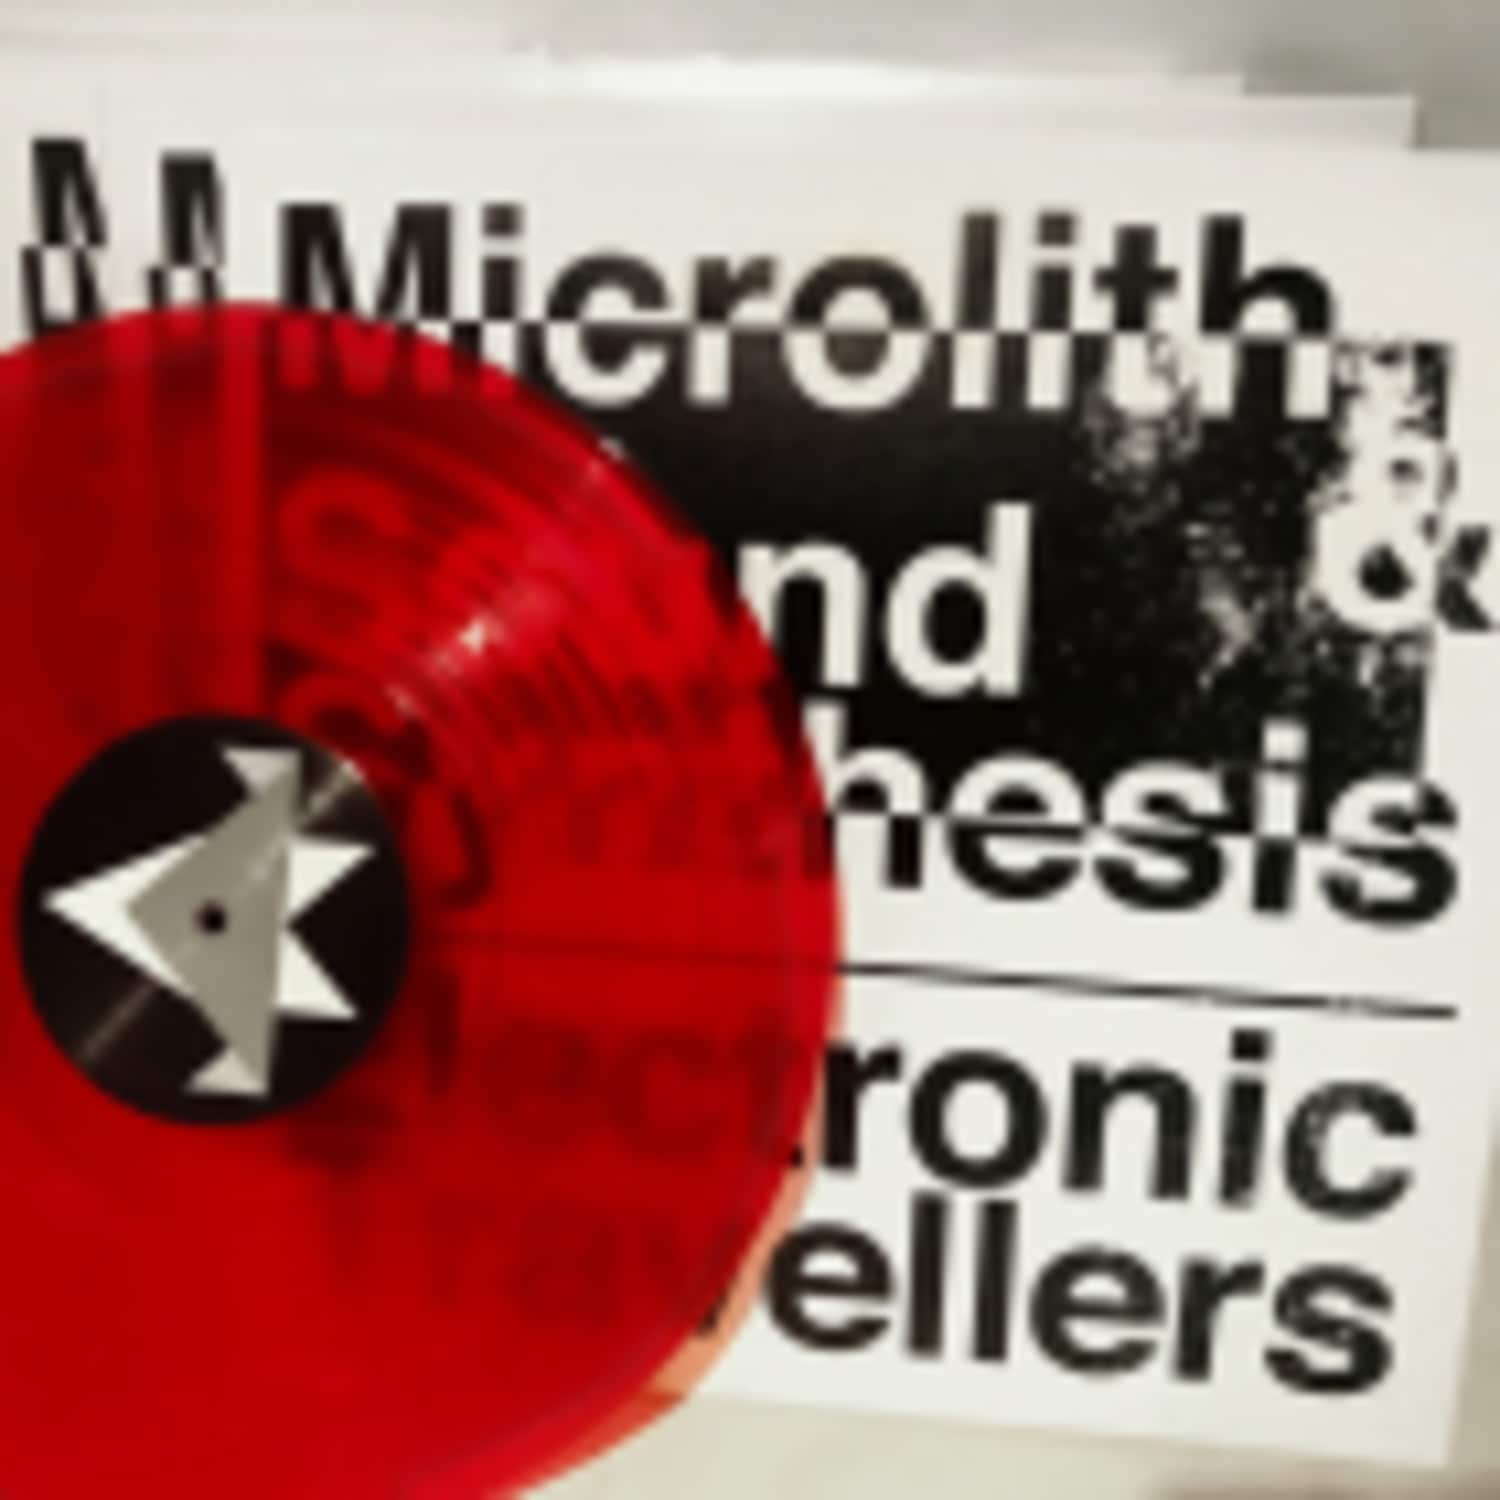 Microlith Sound Synthesis - ELECTRONIC TRAVELLERS